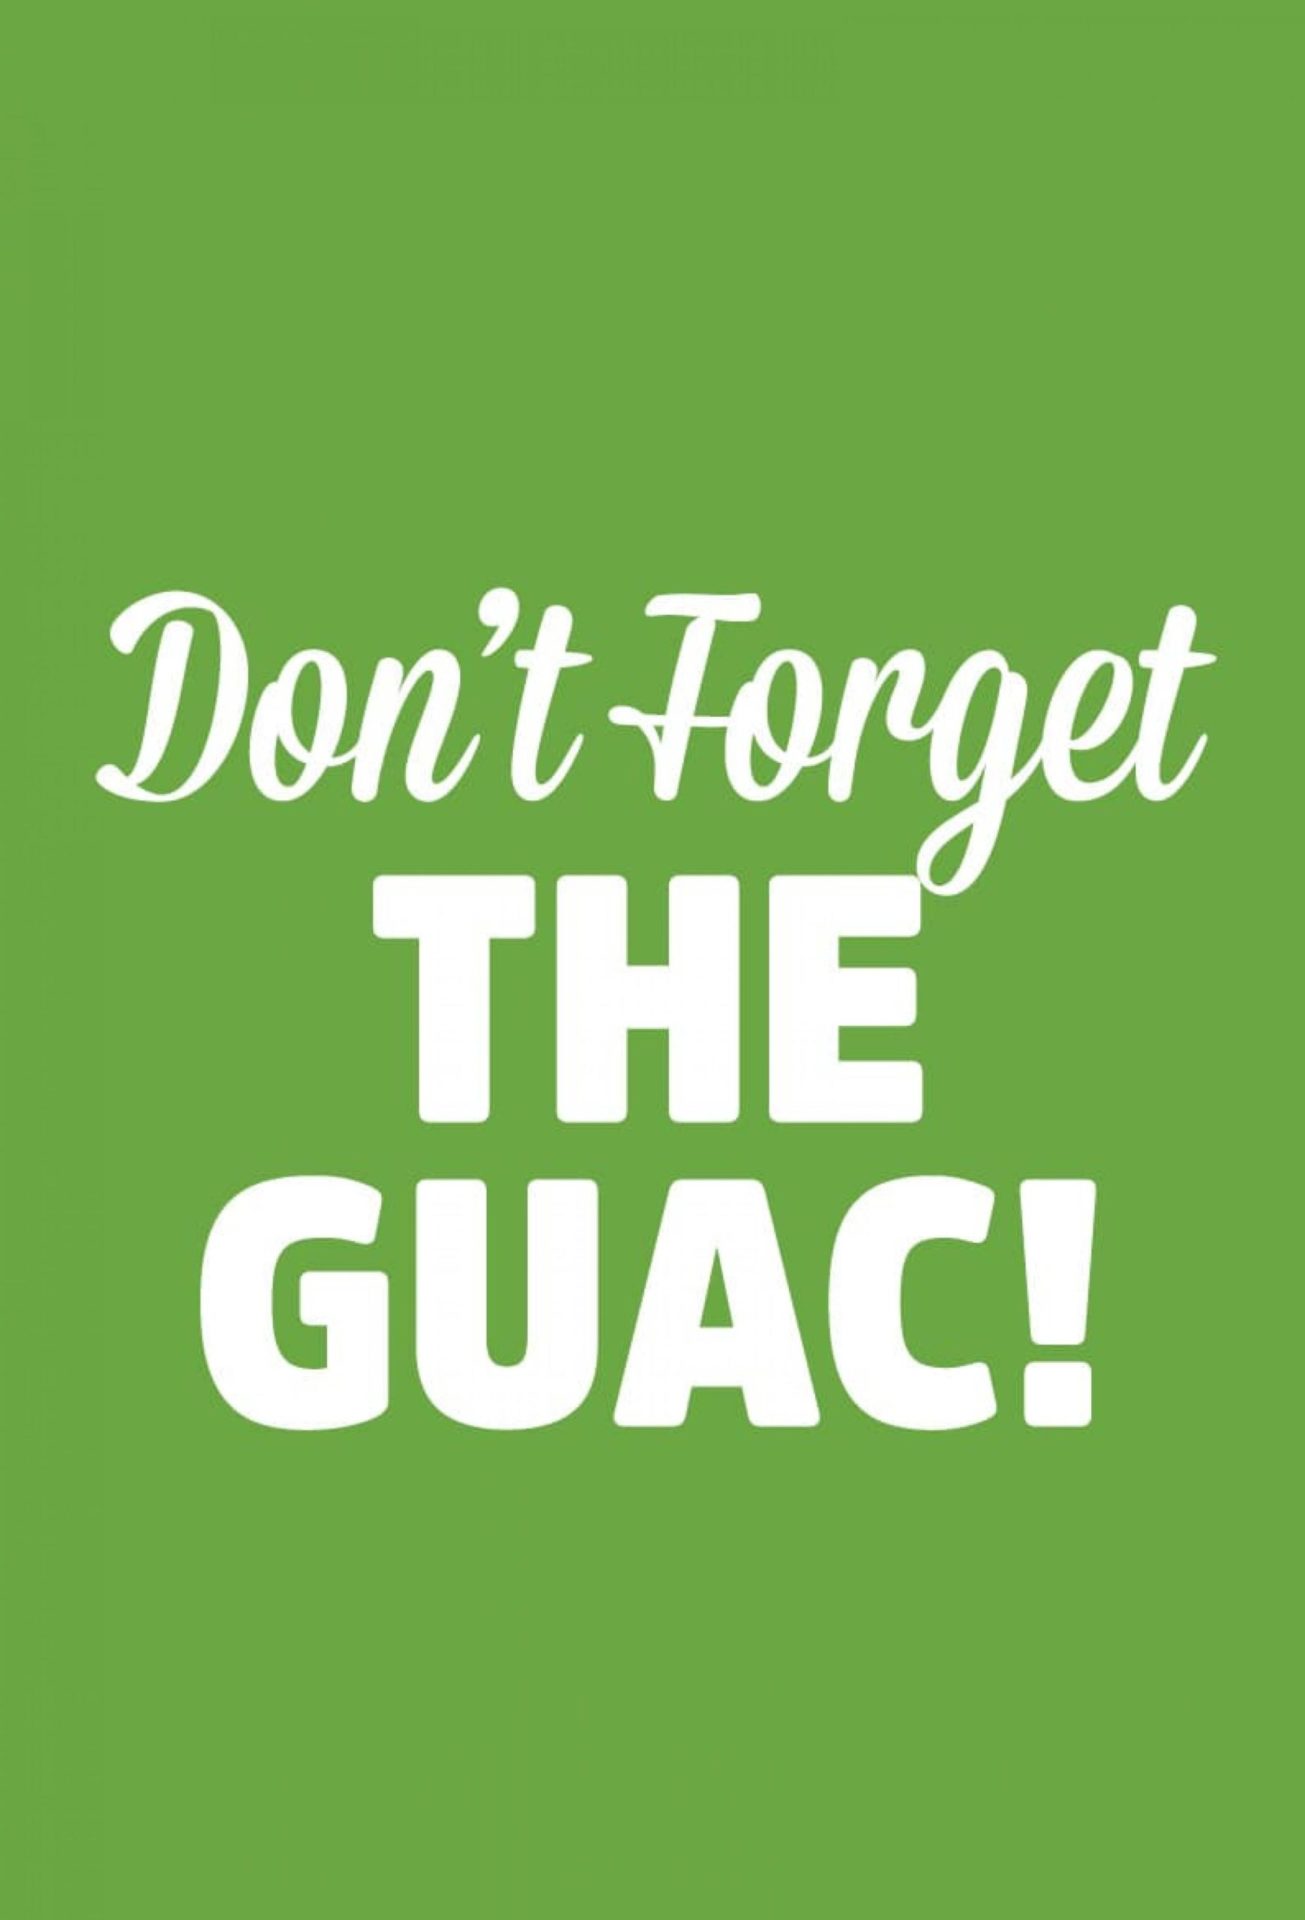 Don't Forget THE GUAC.